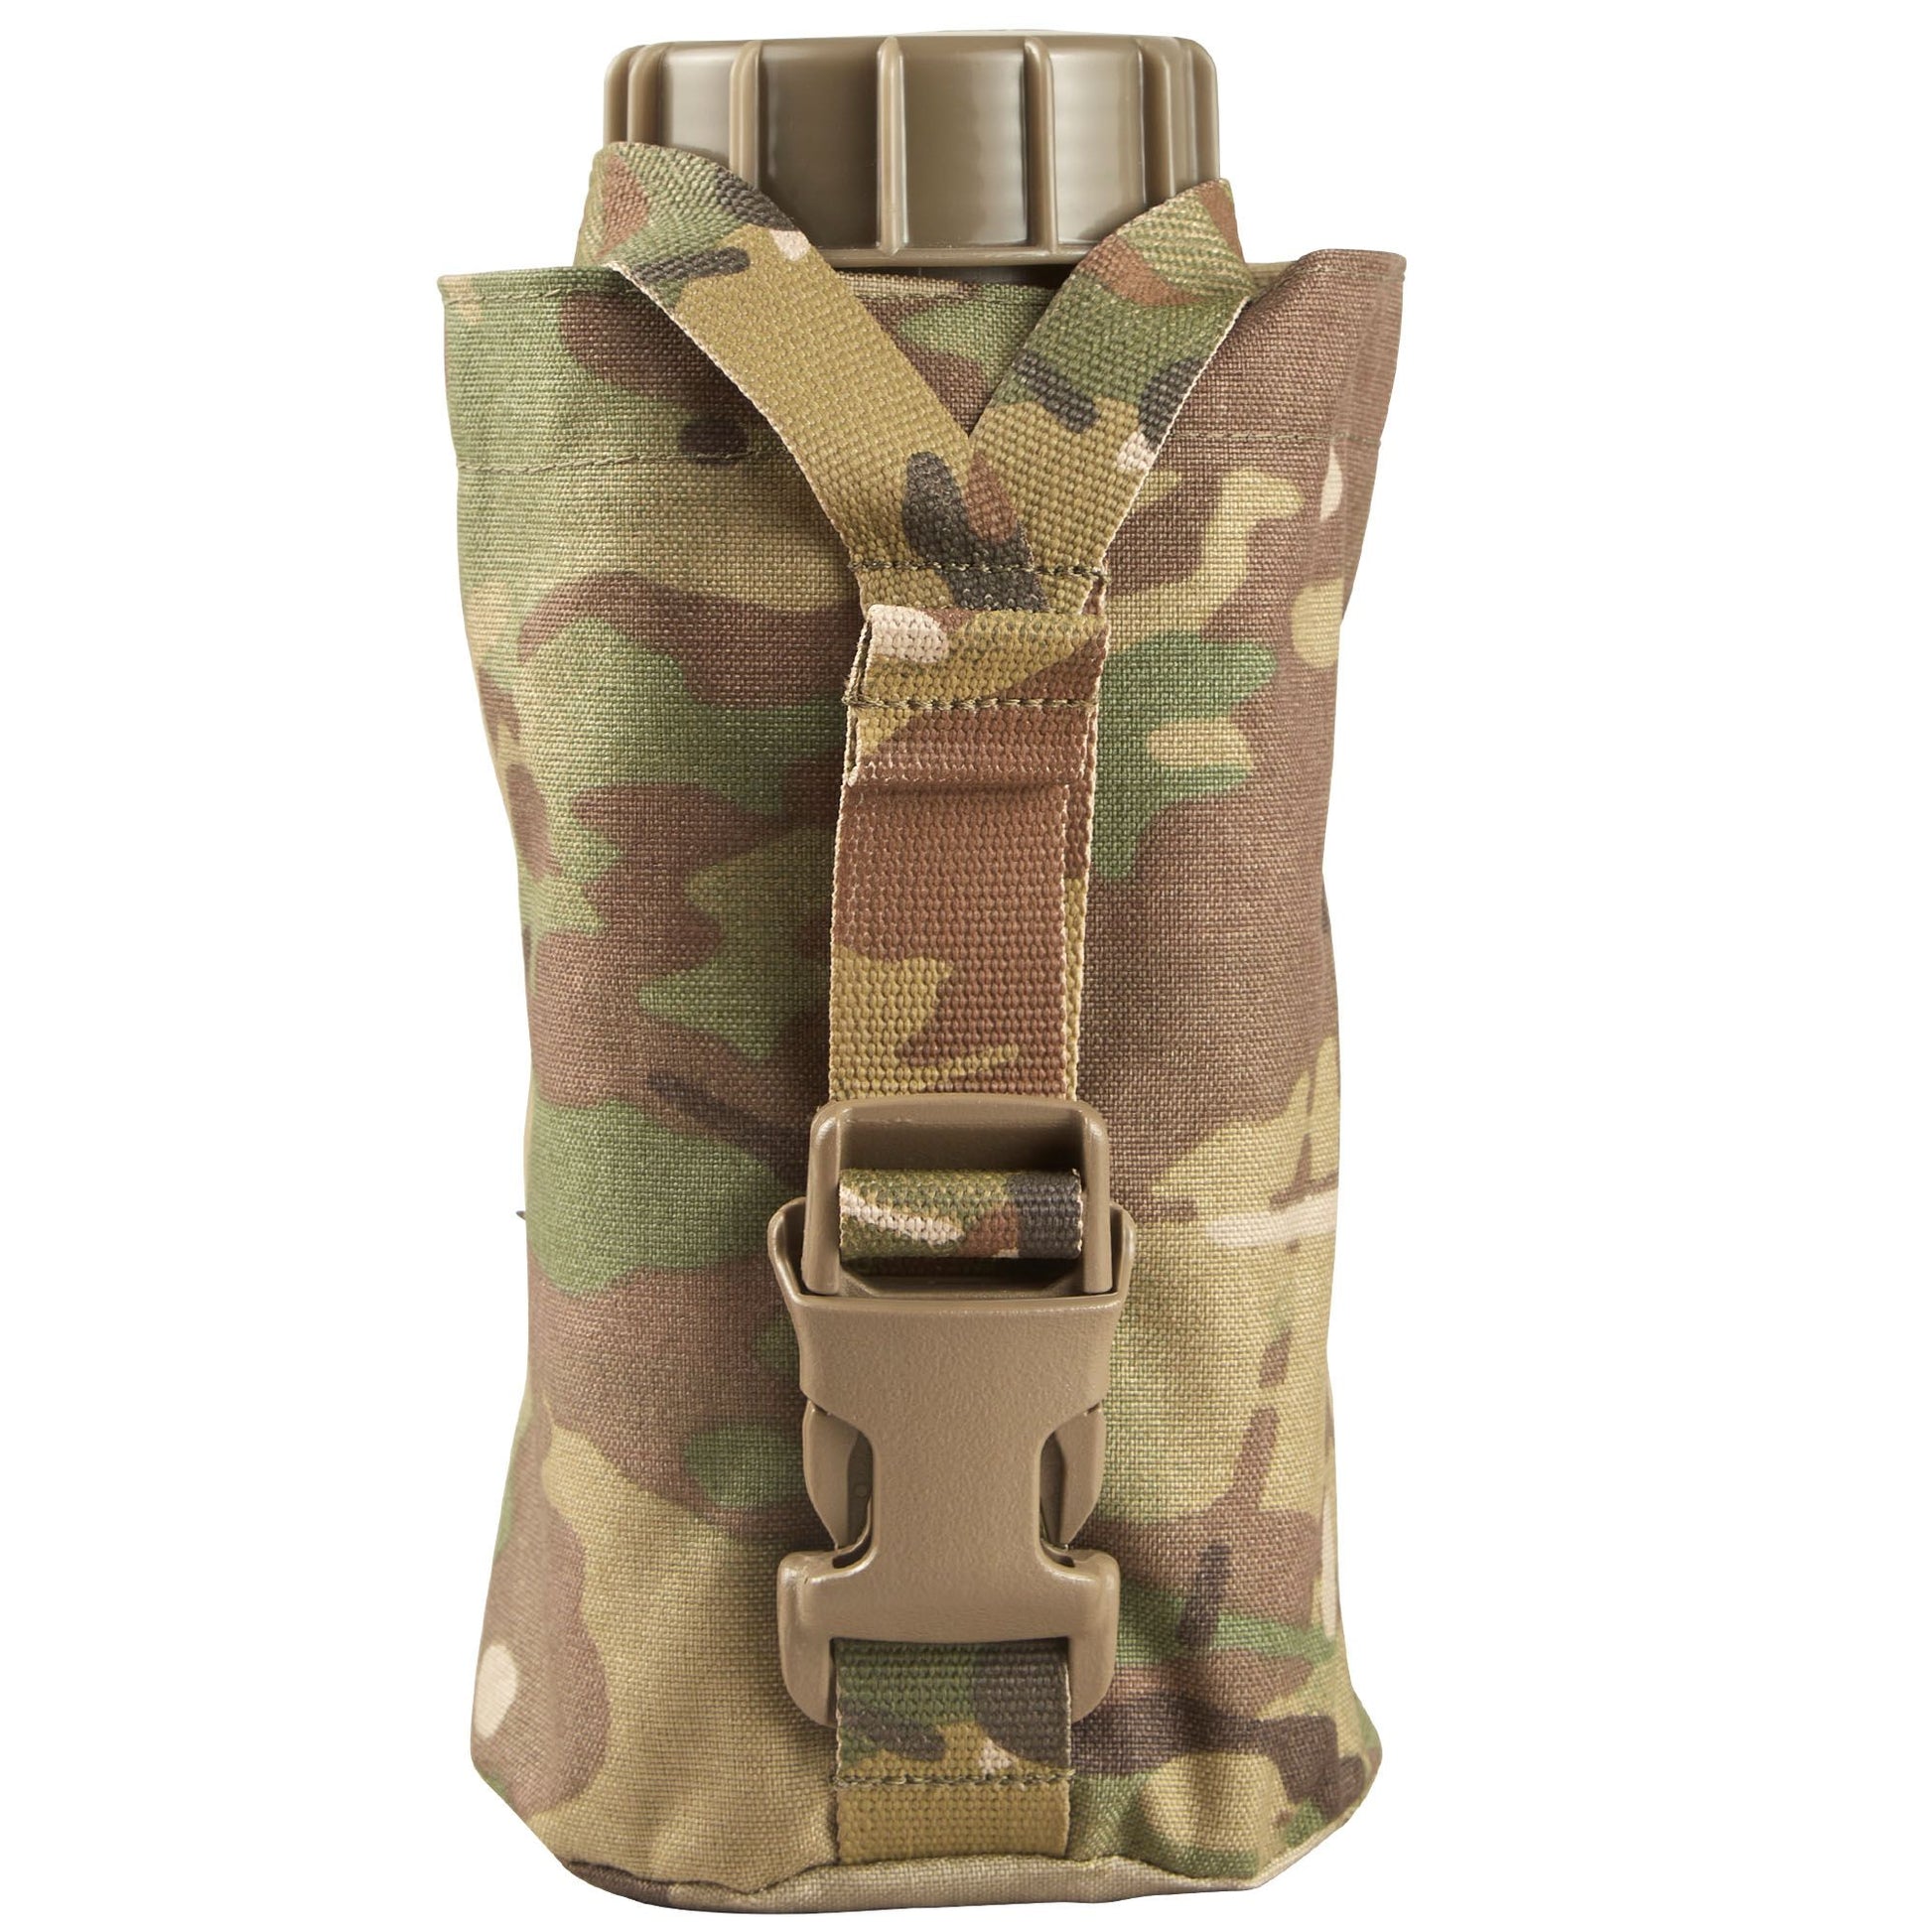 The Nalgene Bottle Pouch is designed to hold a 32oz wide or narrow mouth Nalgene bottle with a titanium cup, a 1L flask. It features a Y style strap with an ITW side release buckle to secure the bottle. www.defenceqstore.com.au